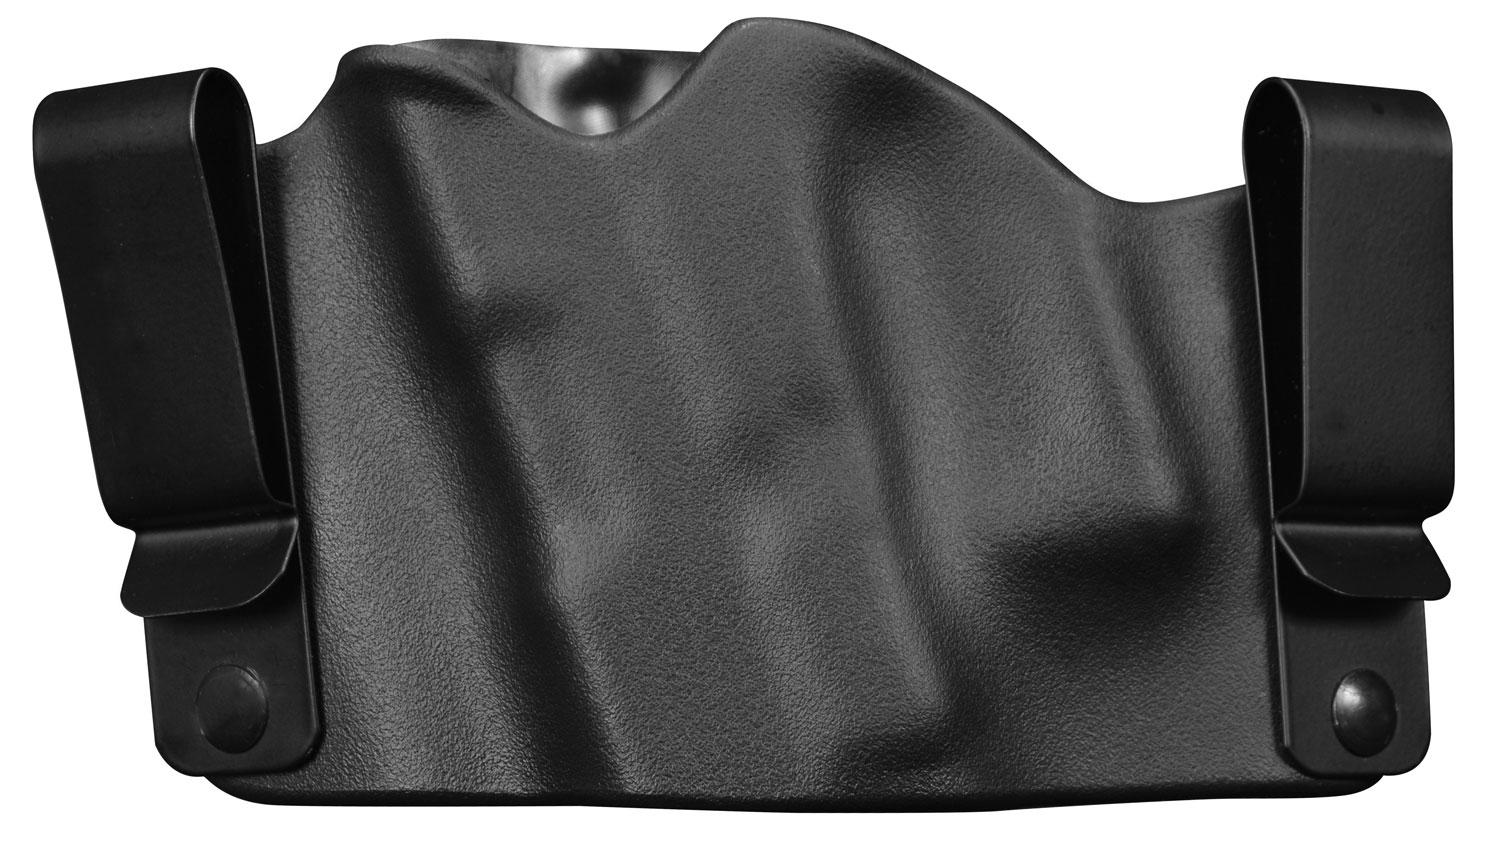 Leather Kydex Paddle Gun Holster LH RH For Taurus 809 840 Compact